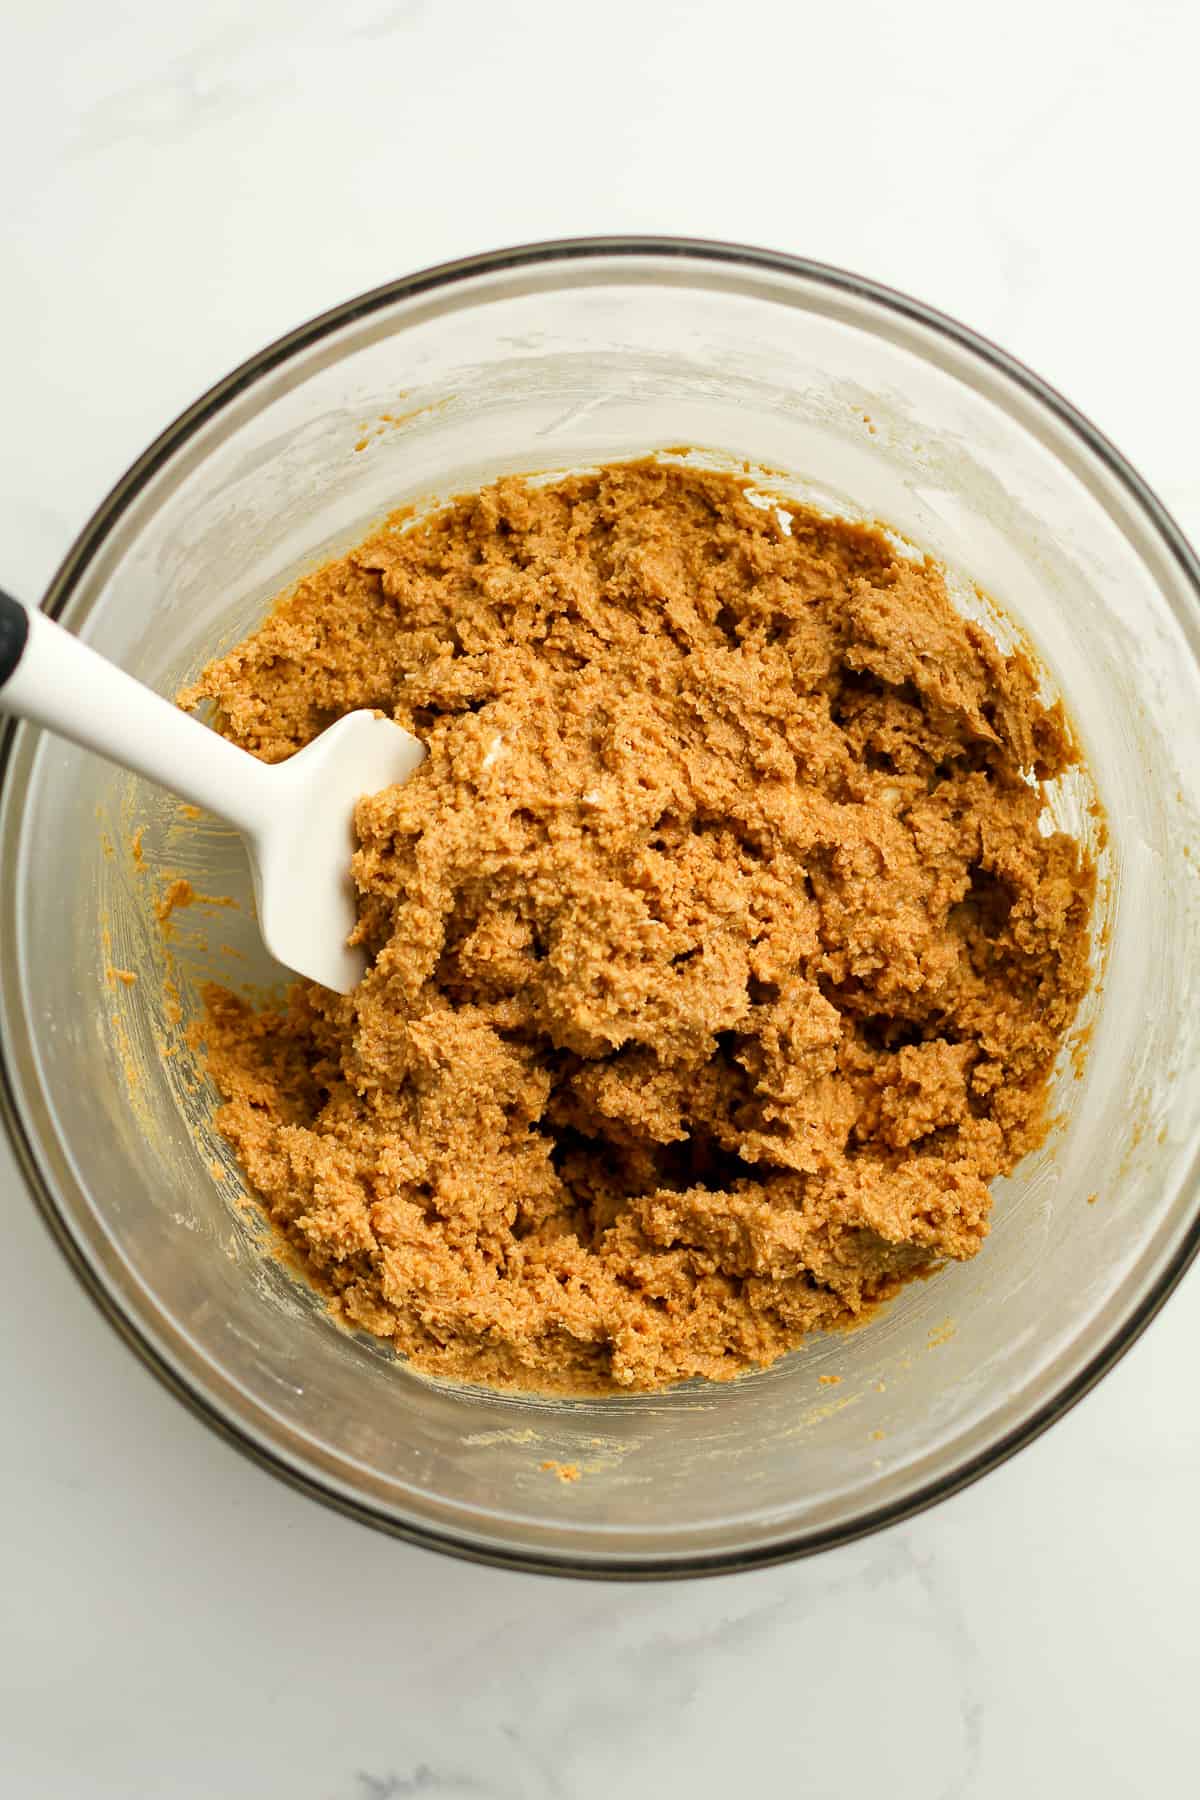 A bowl of the combined peanut butter ball mixture.